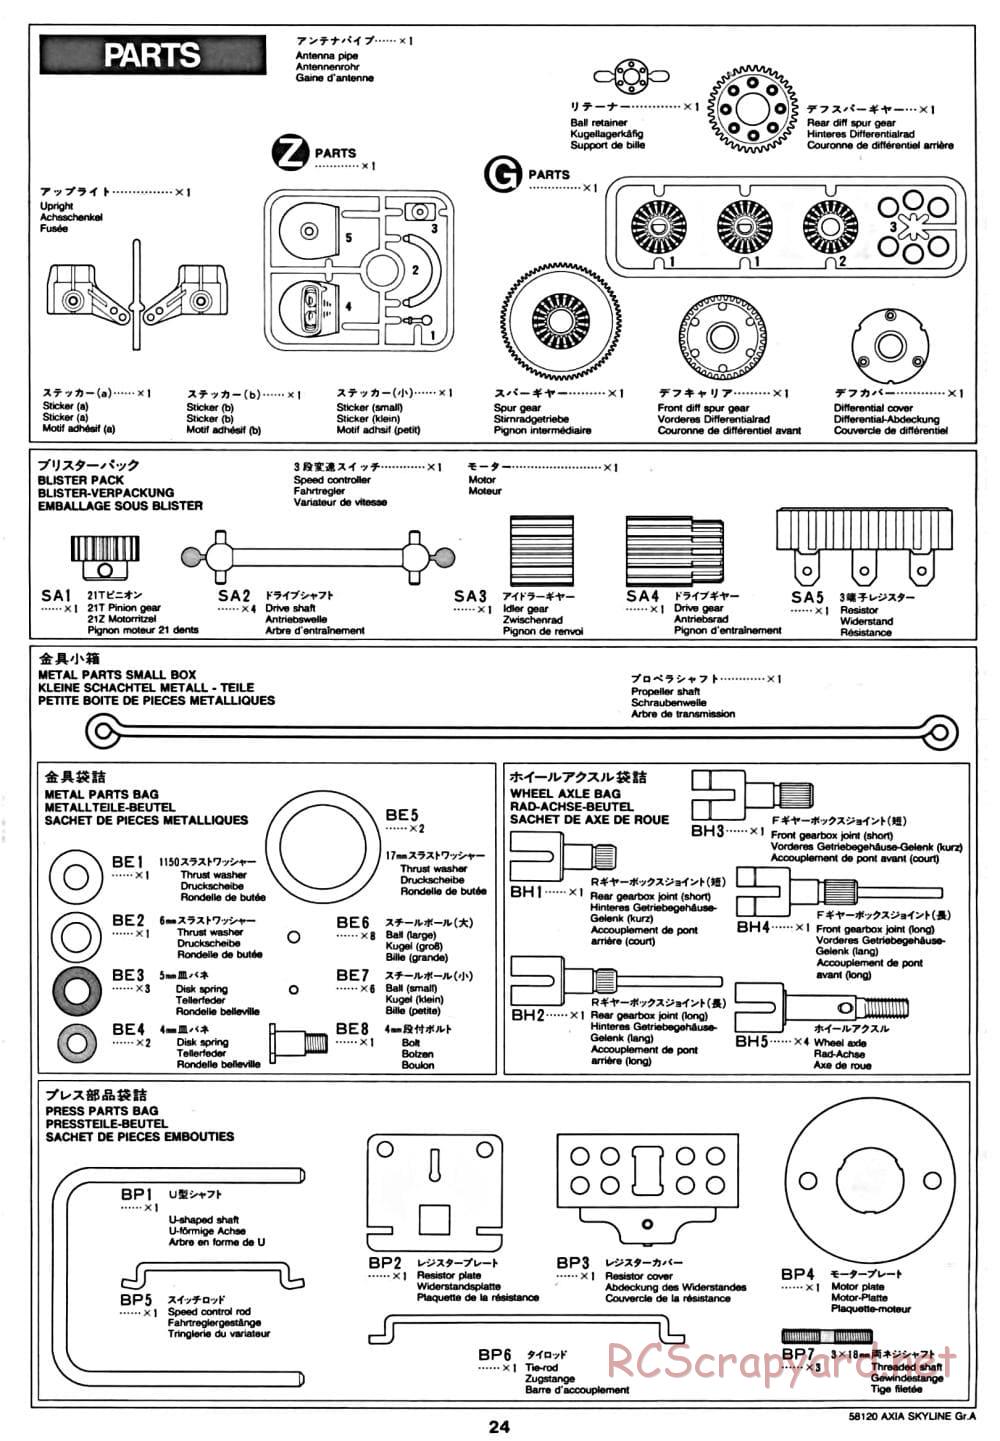 Tamiya - Axia Skyline GT-R Gr.A - TA-01 Chassis - Manual - Page 25